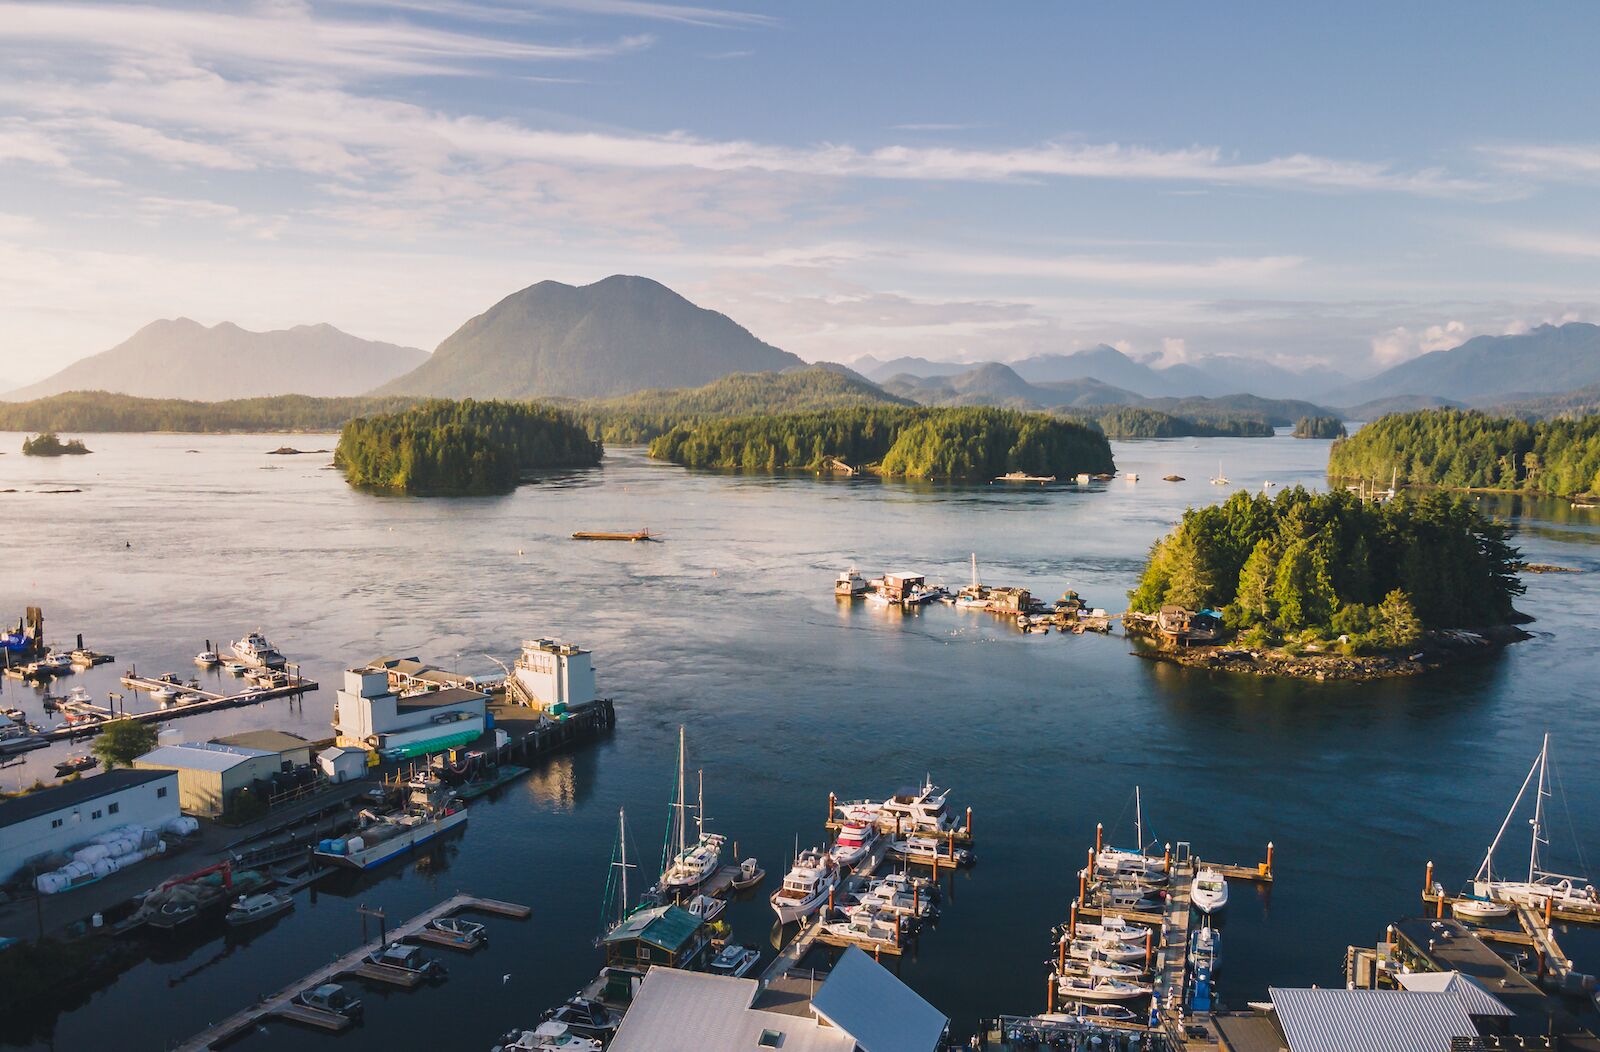 Tofino is a Canadian small town on Vancouver Island. View from the Harbor of Tofino.